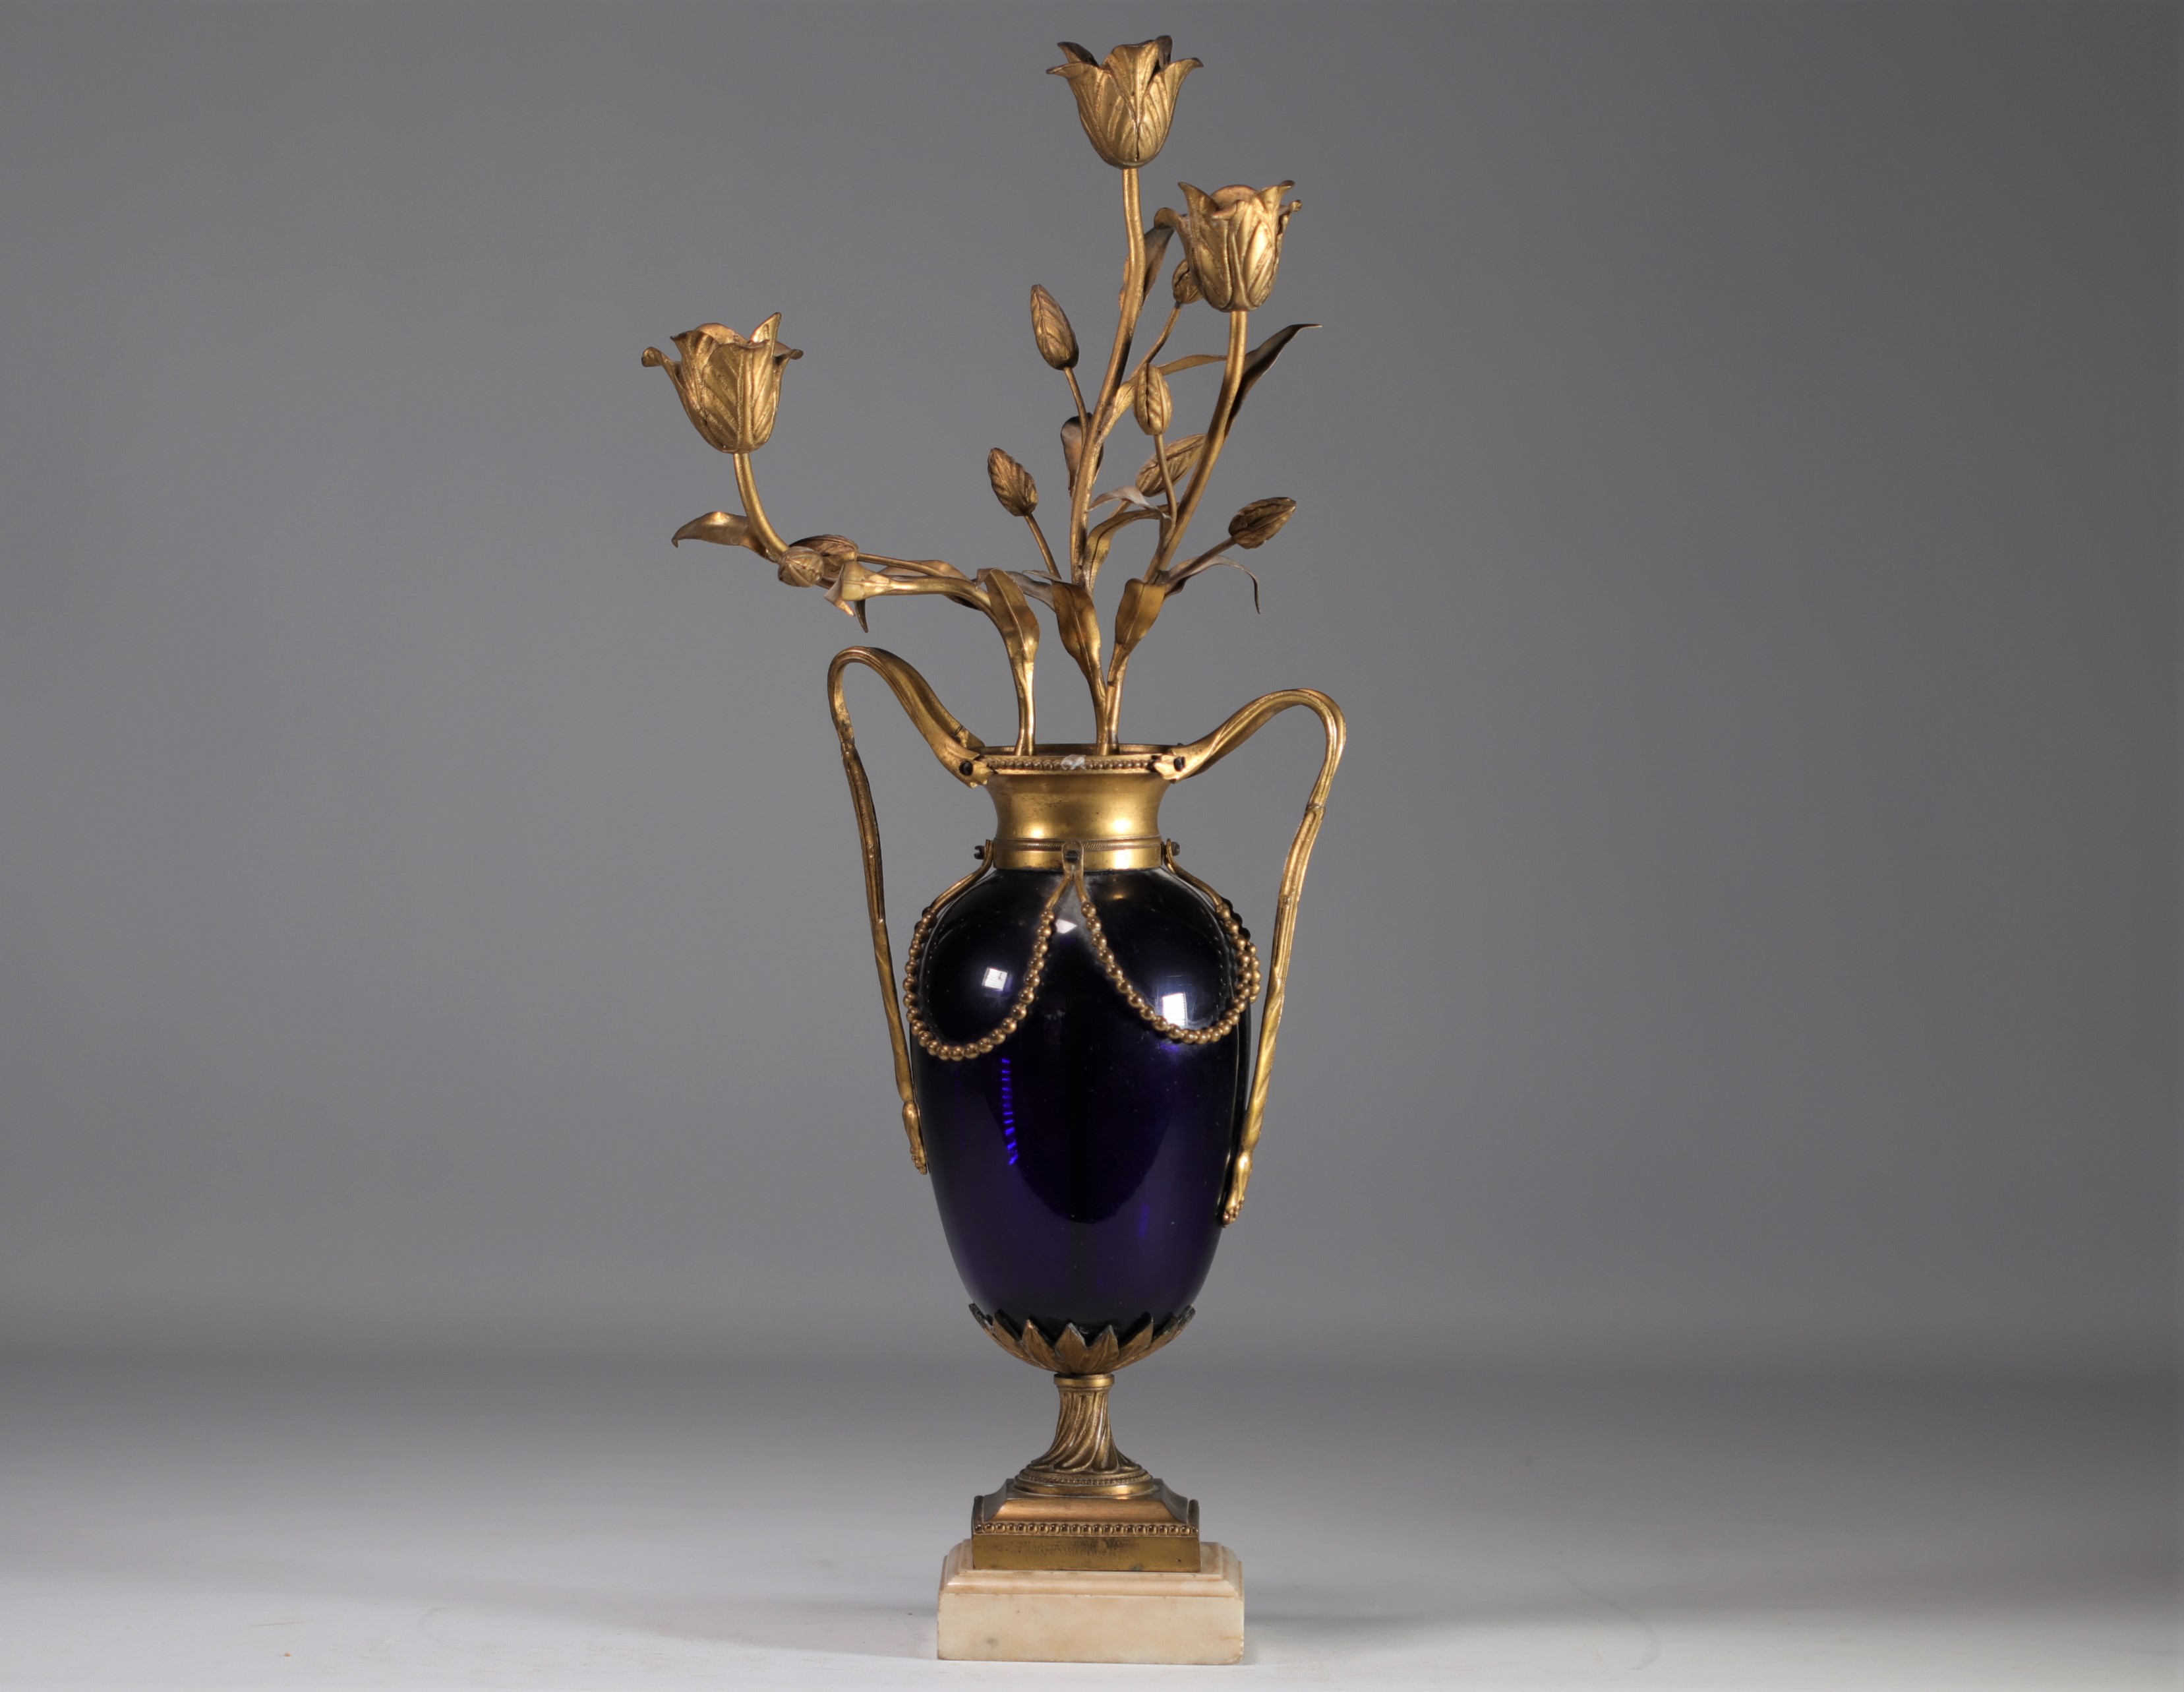 Pair of "candelabra" vases in Le Creusot blue glass and bronze, Louis XVI period - Image 4 of 5